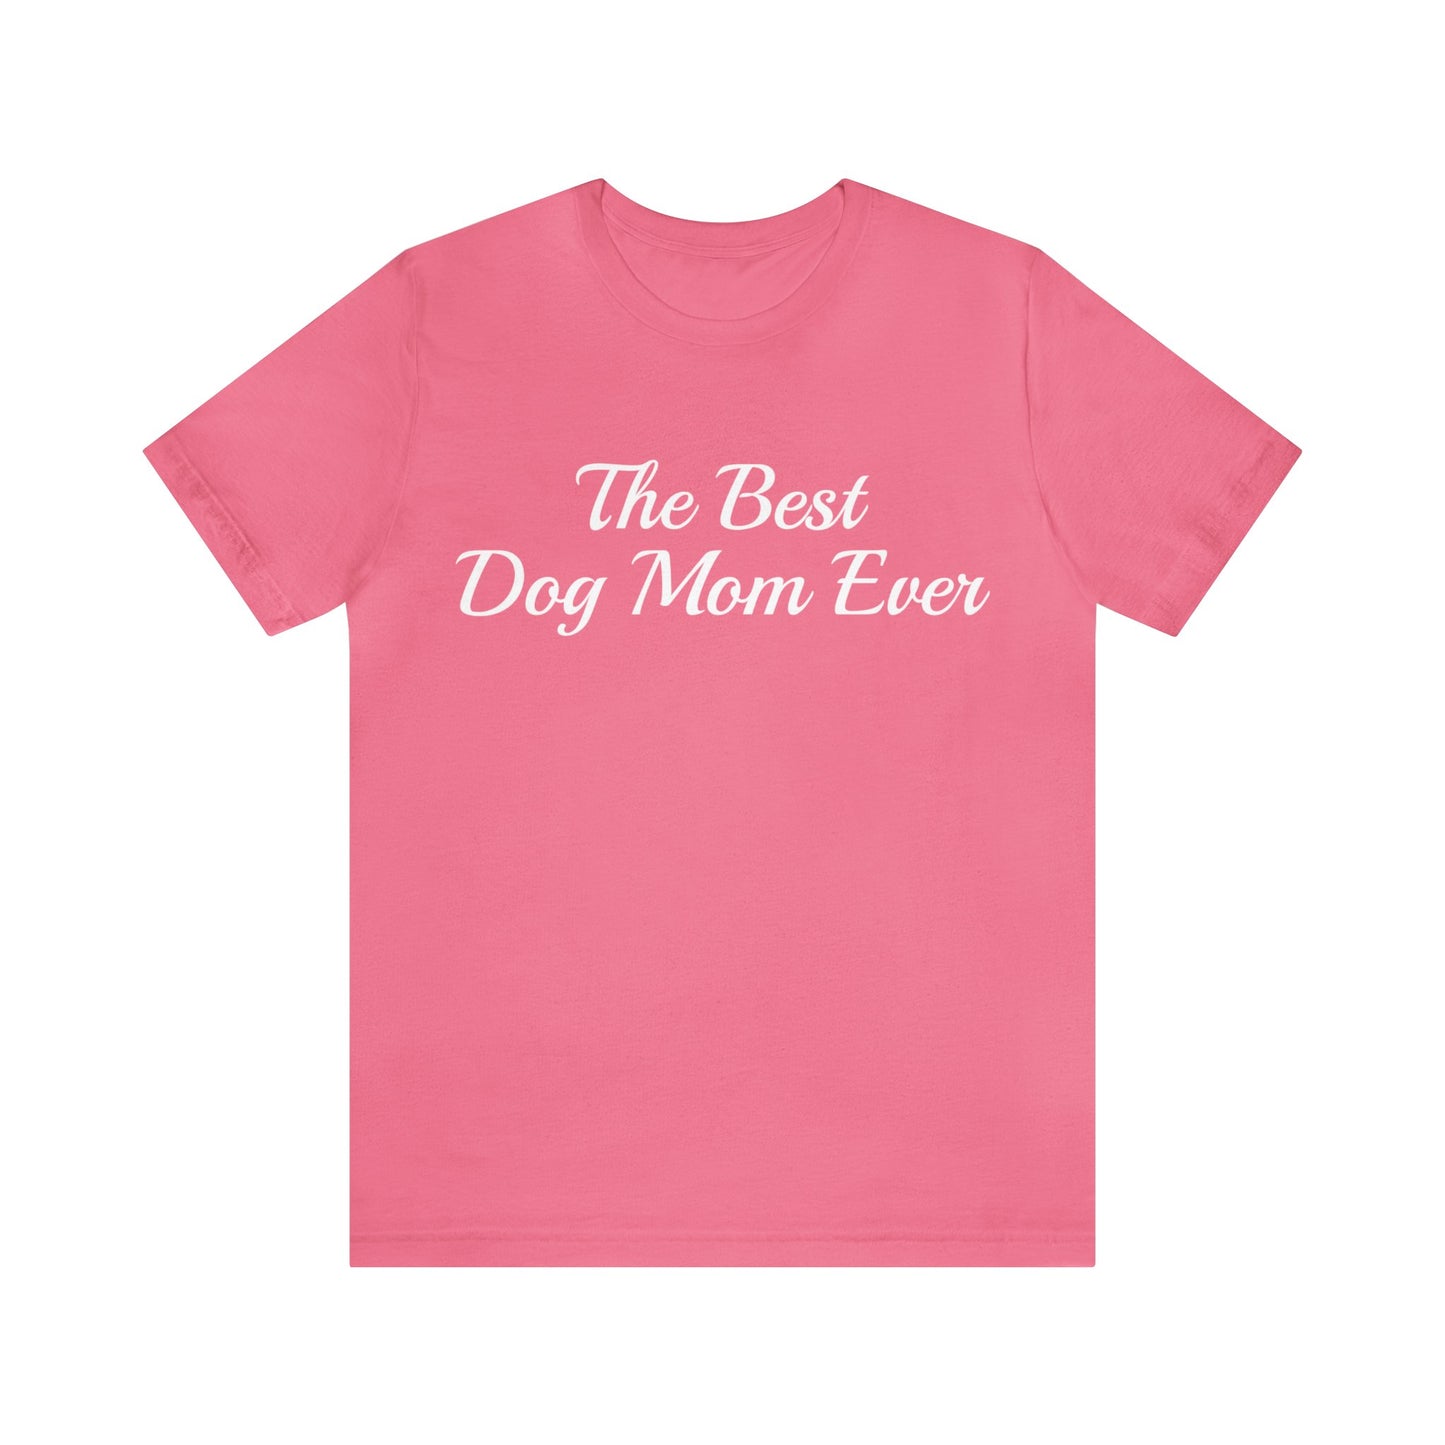 Charity Pink T-Shirt Tshirt Design Gift for Friend and Family Short Sleeved Shirt for Dog Lovers Petrova Designs